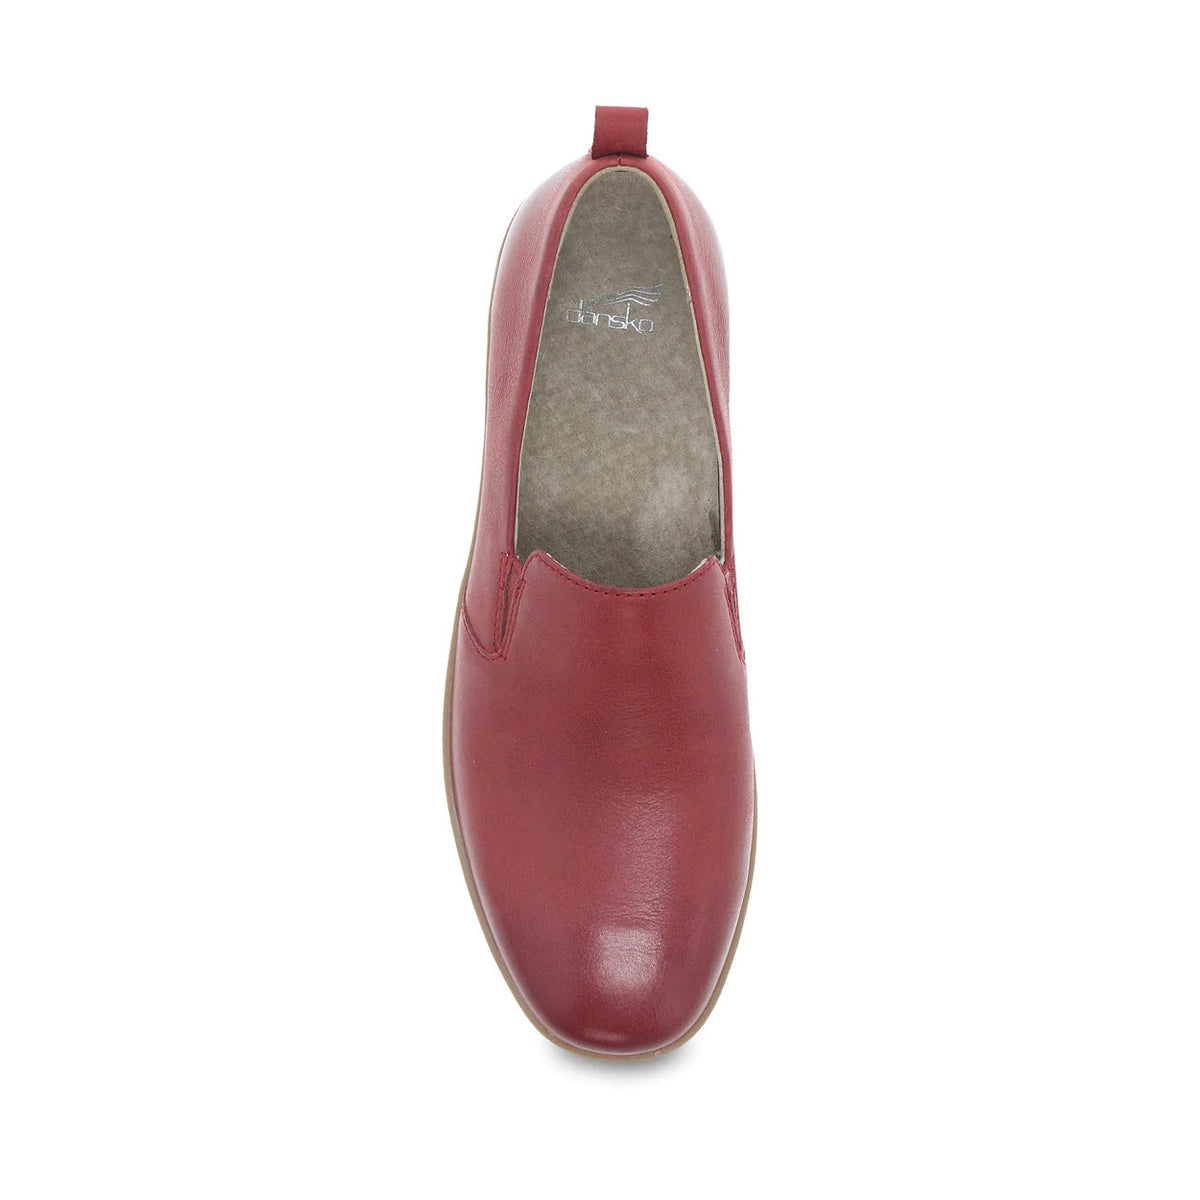 A single Dansko Linley Red Burnished loafer featuring Dansko Natural Arch support, pictured from above on a white background.